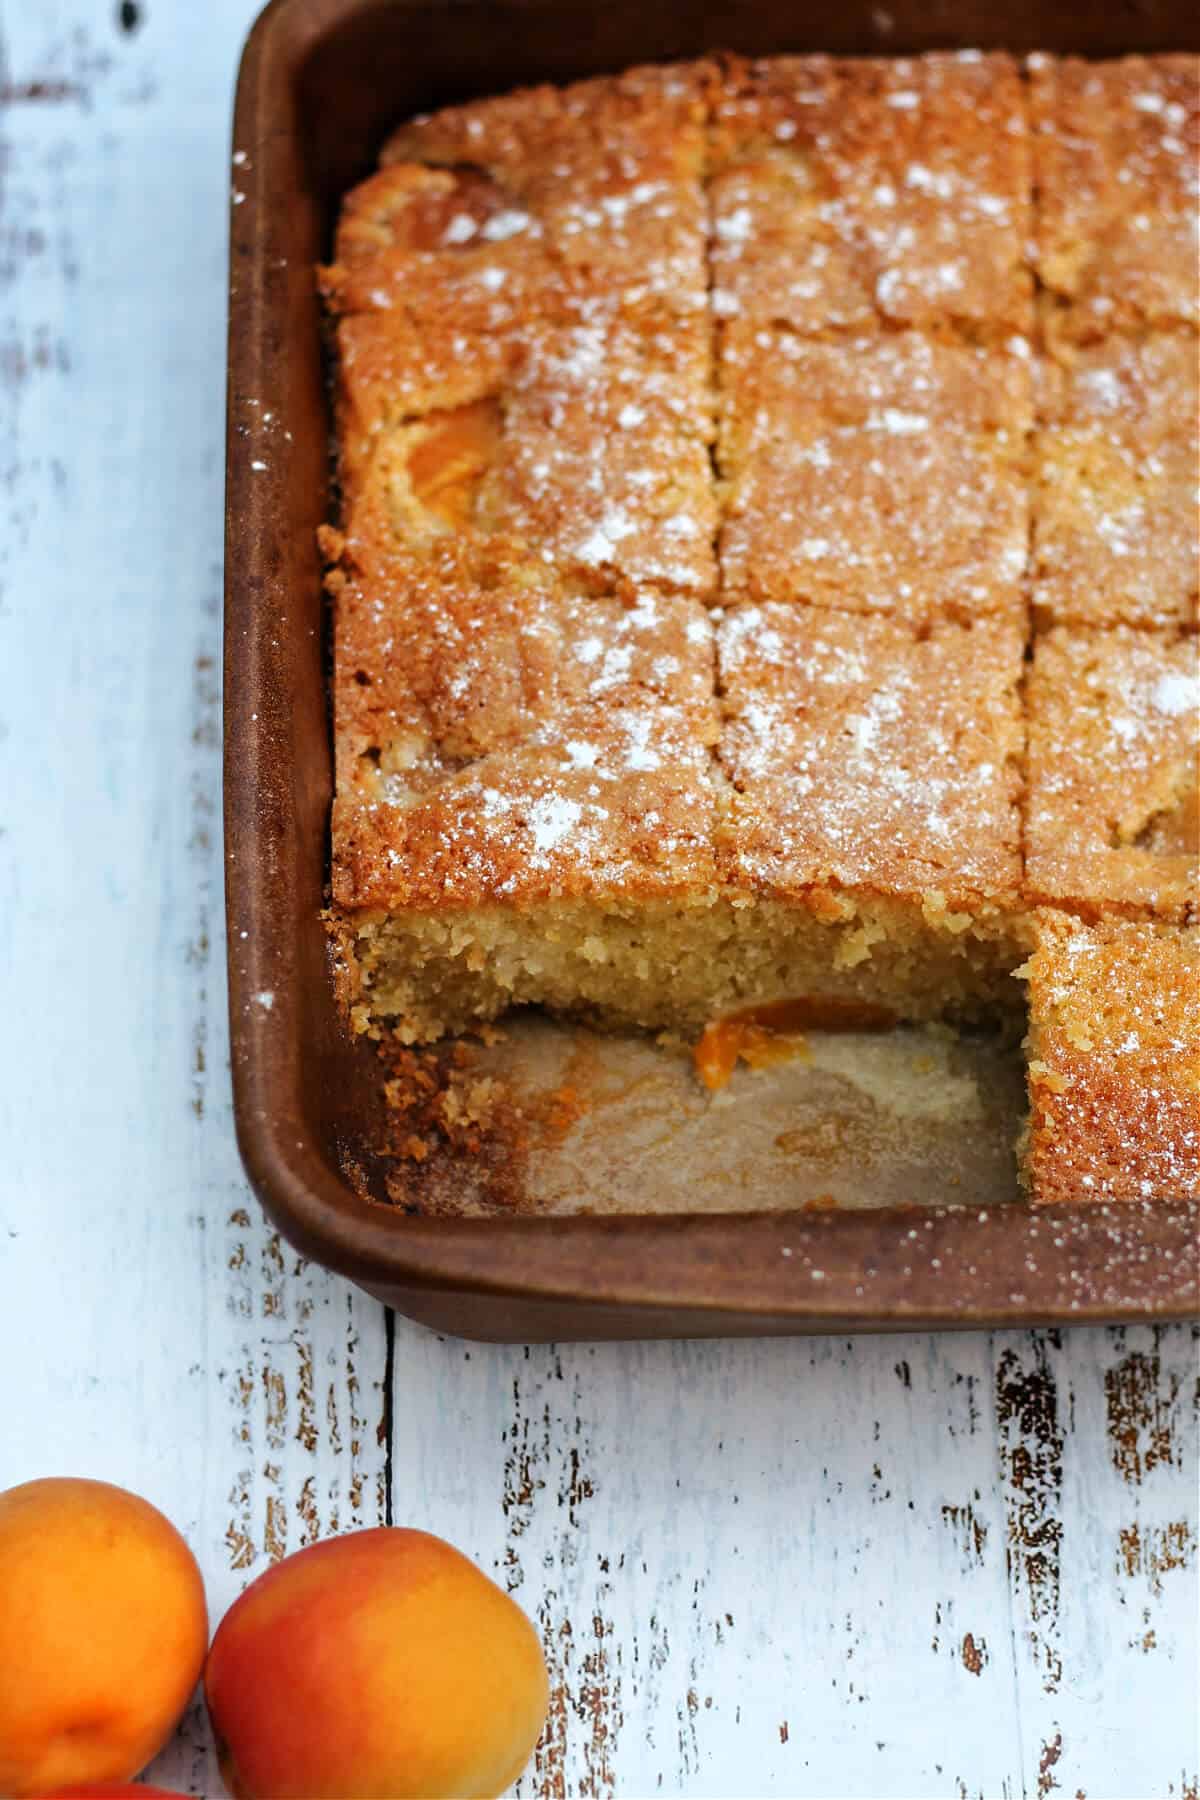 Baking pan with squares of cake cut out.